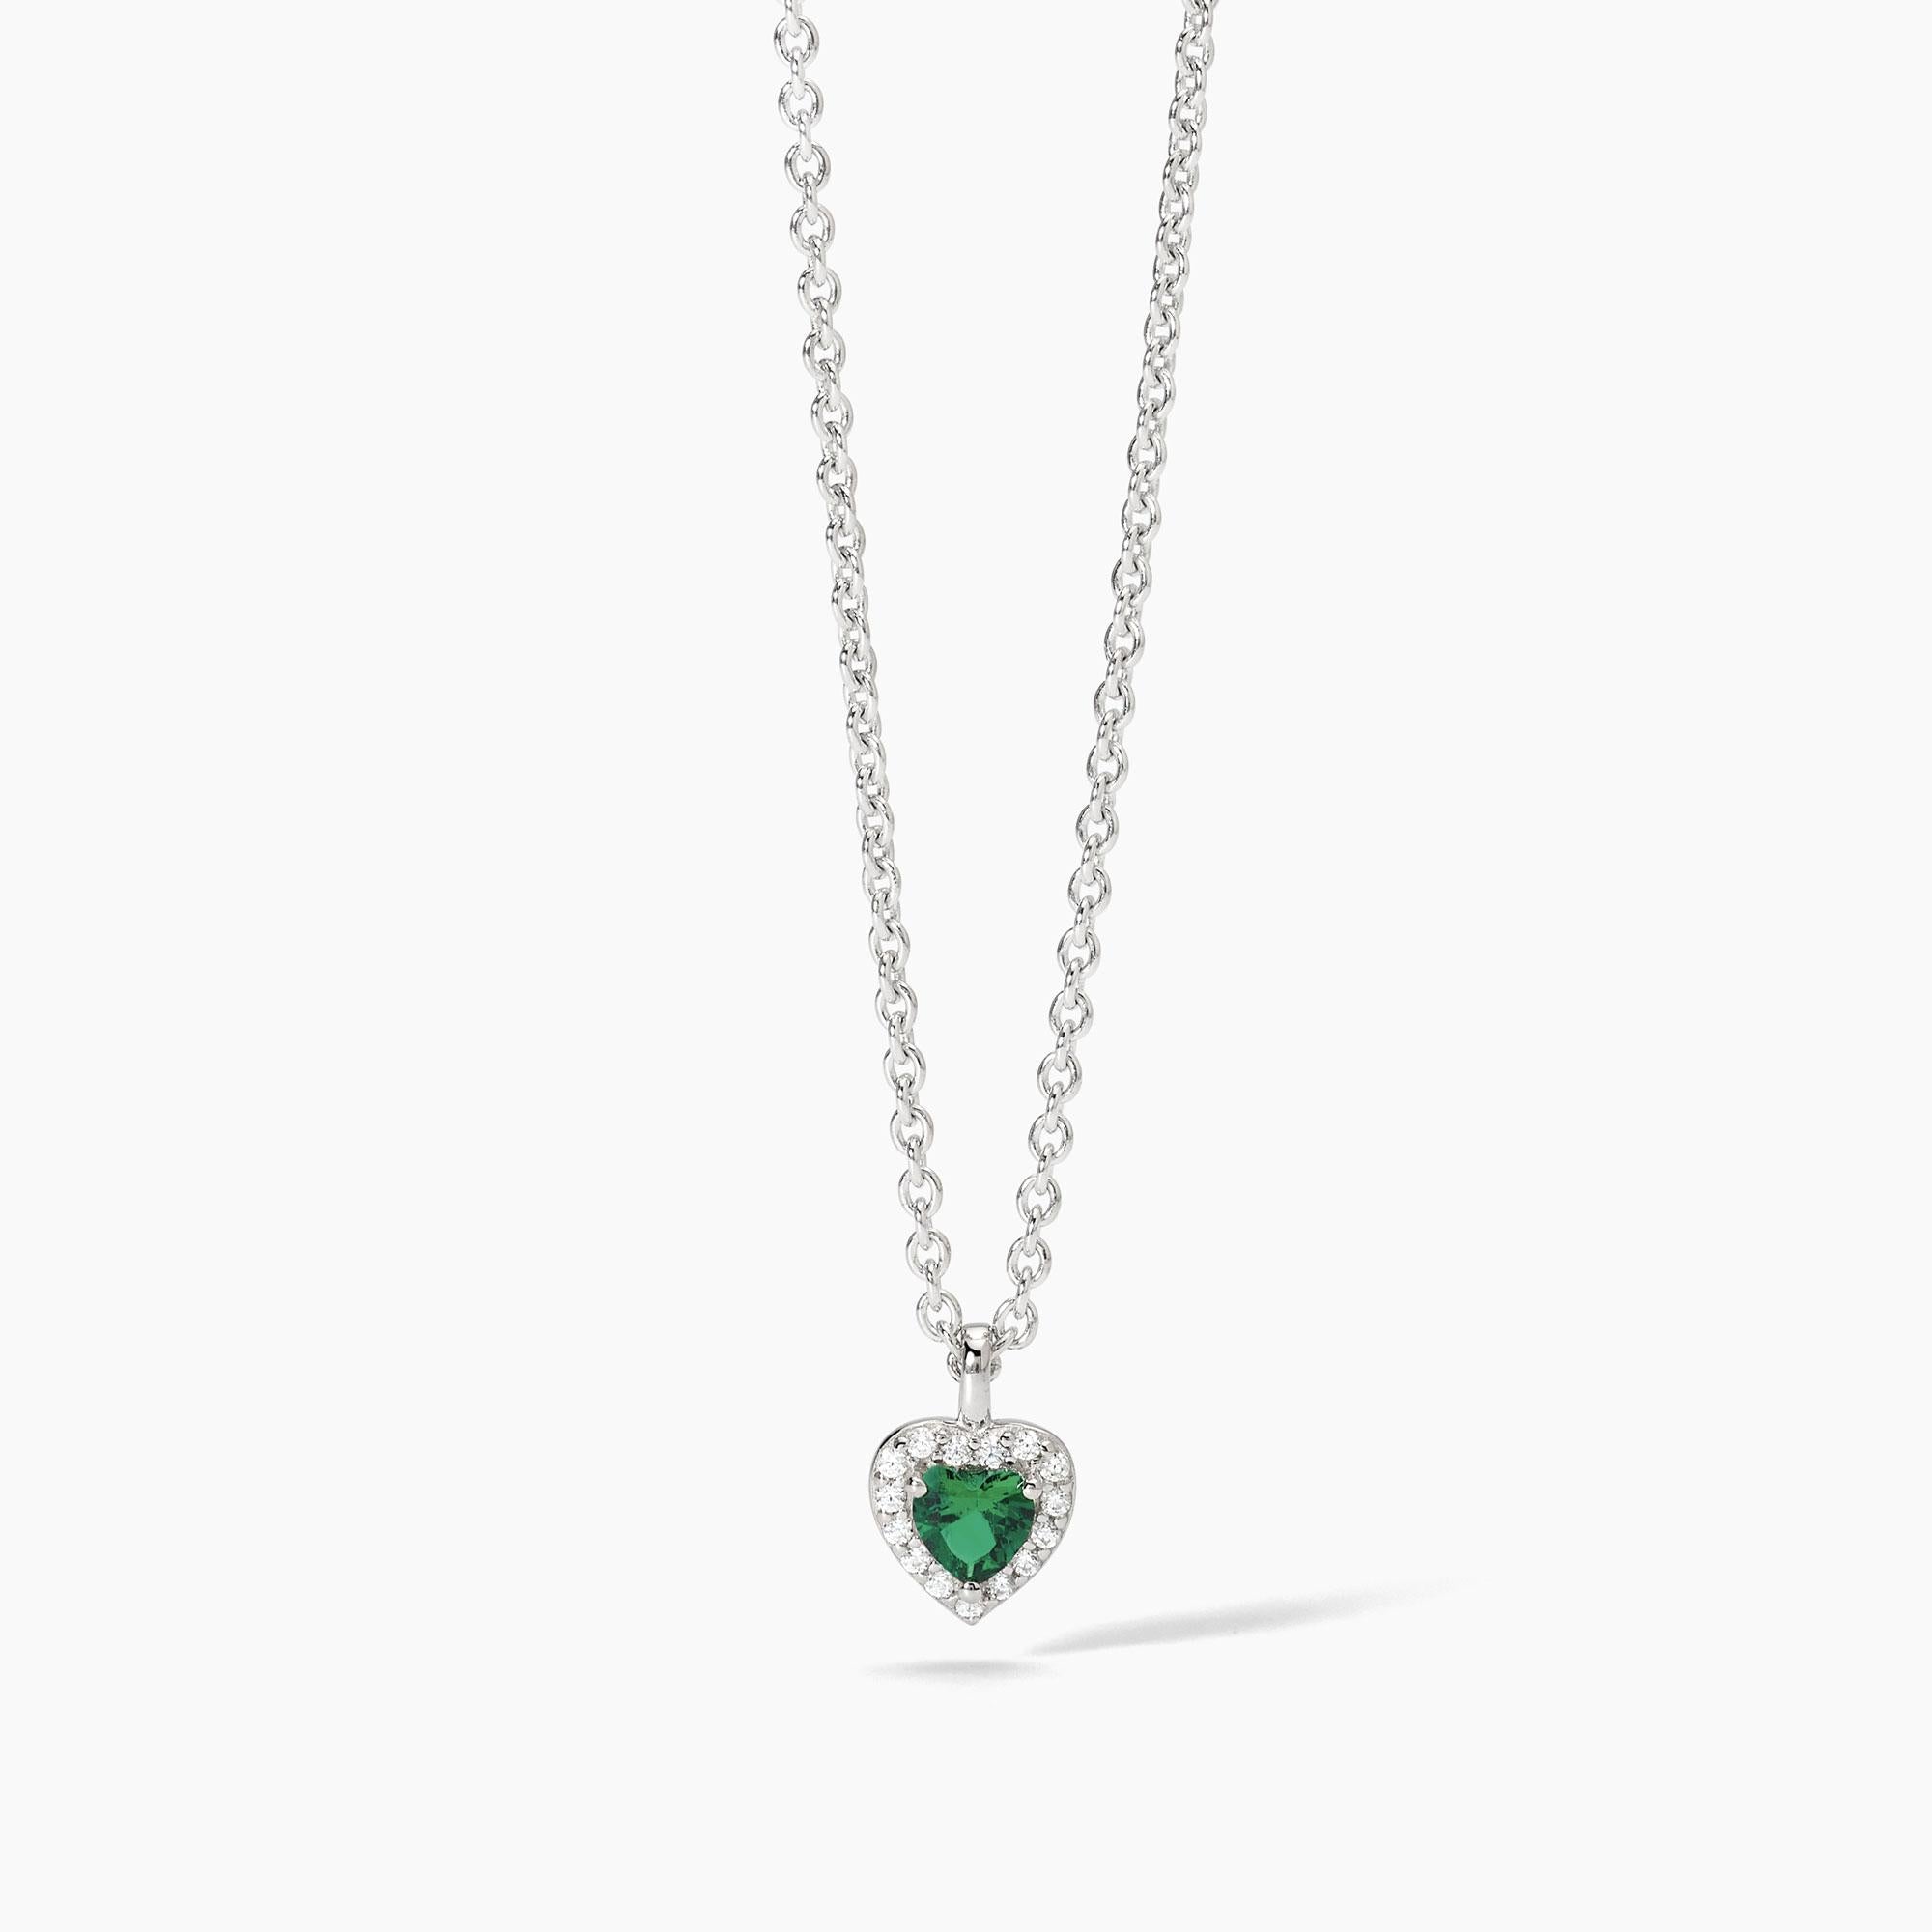 Mabina Woman - Silver necklace with heart-shaped synthetic emerald LOVE AFFAIR - 553667